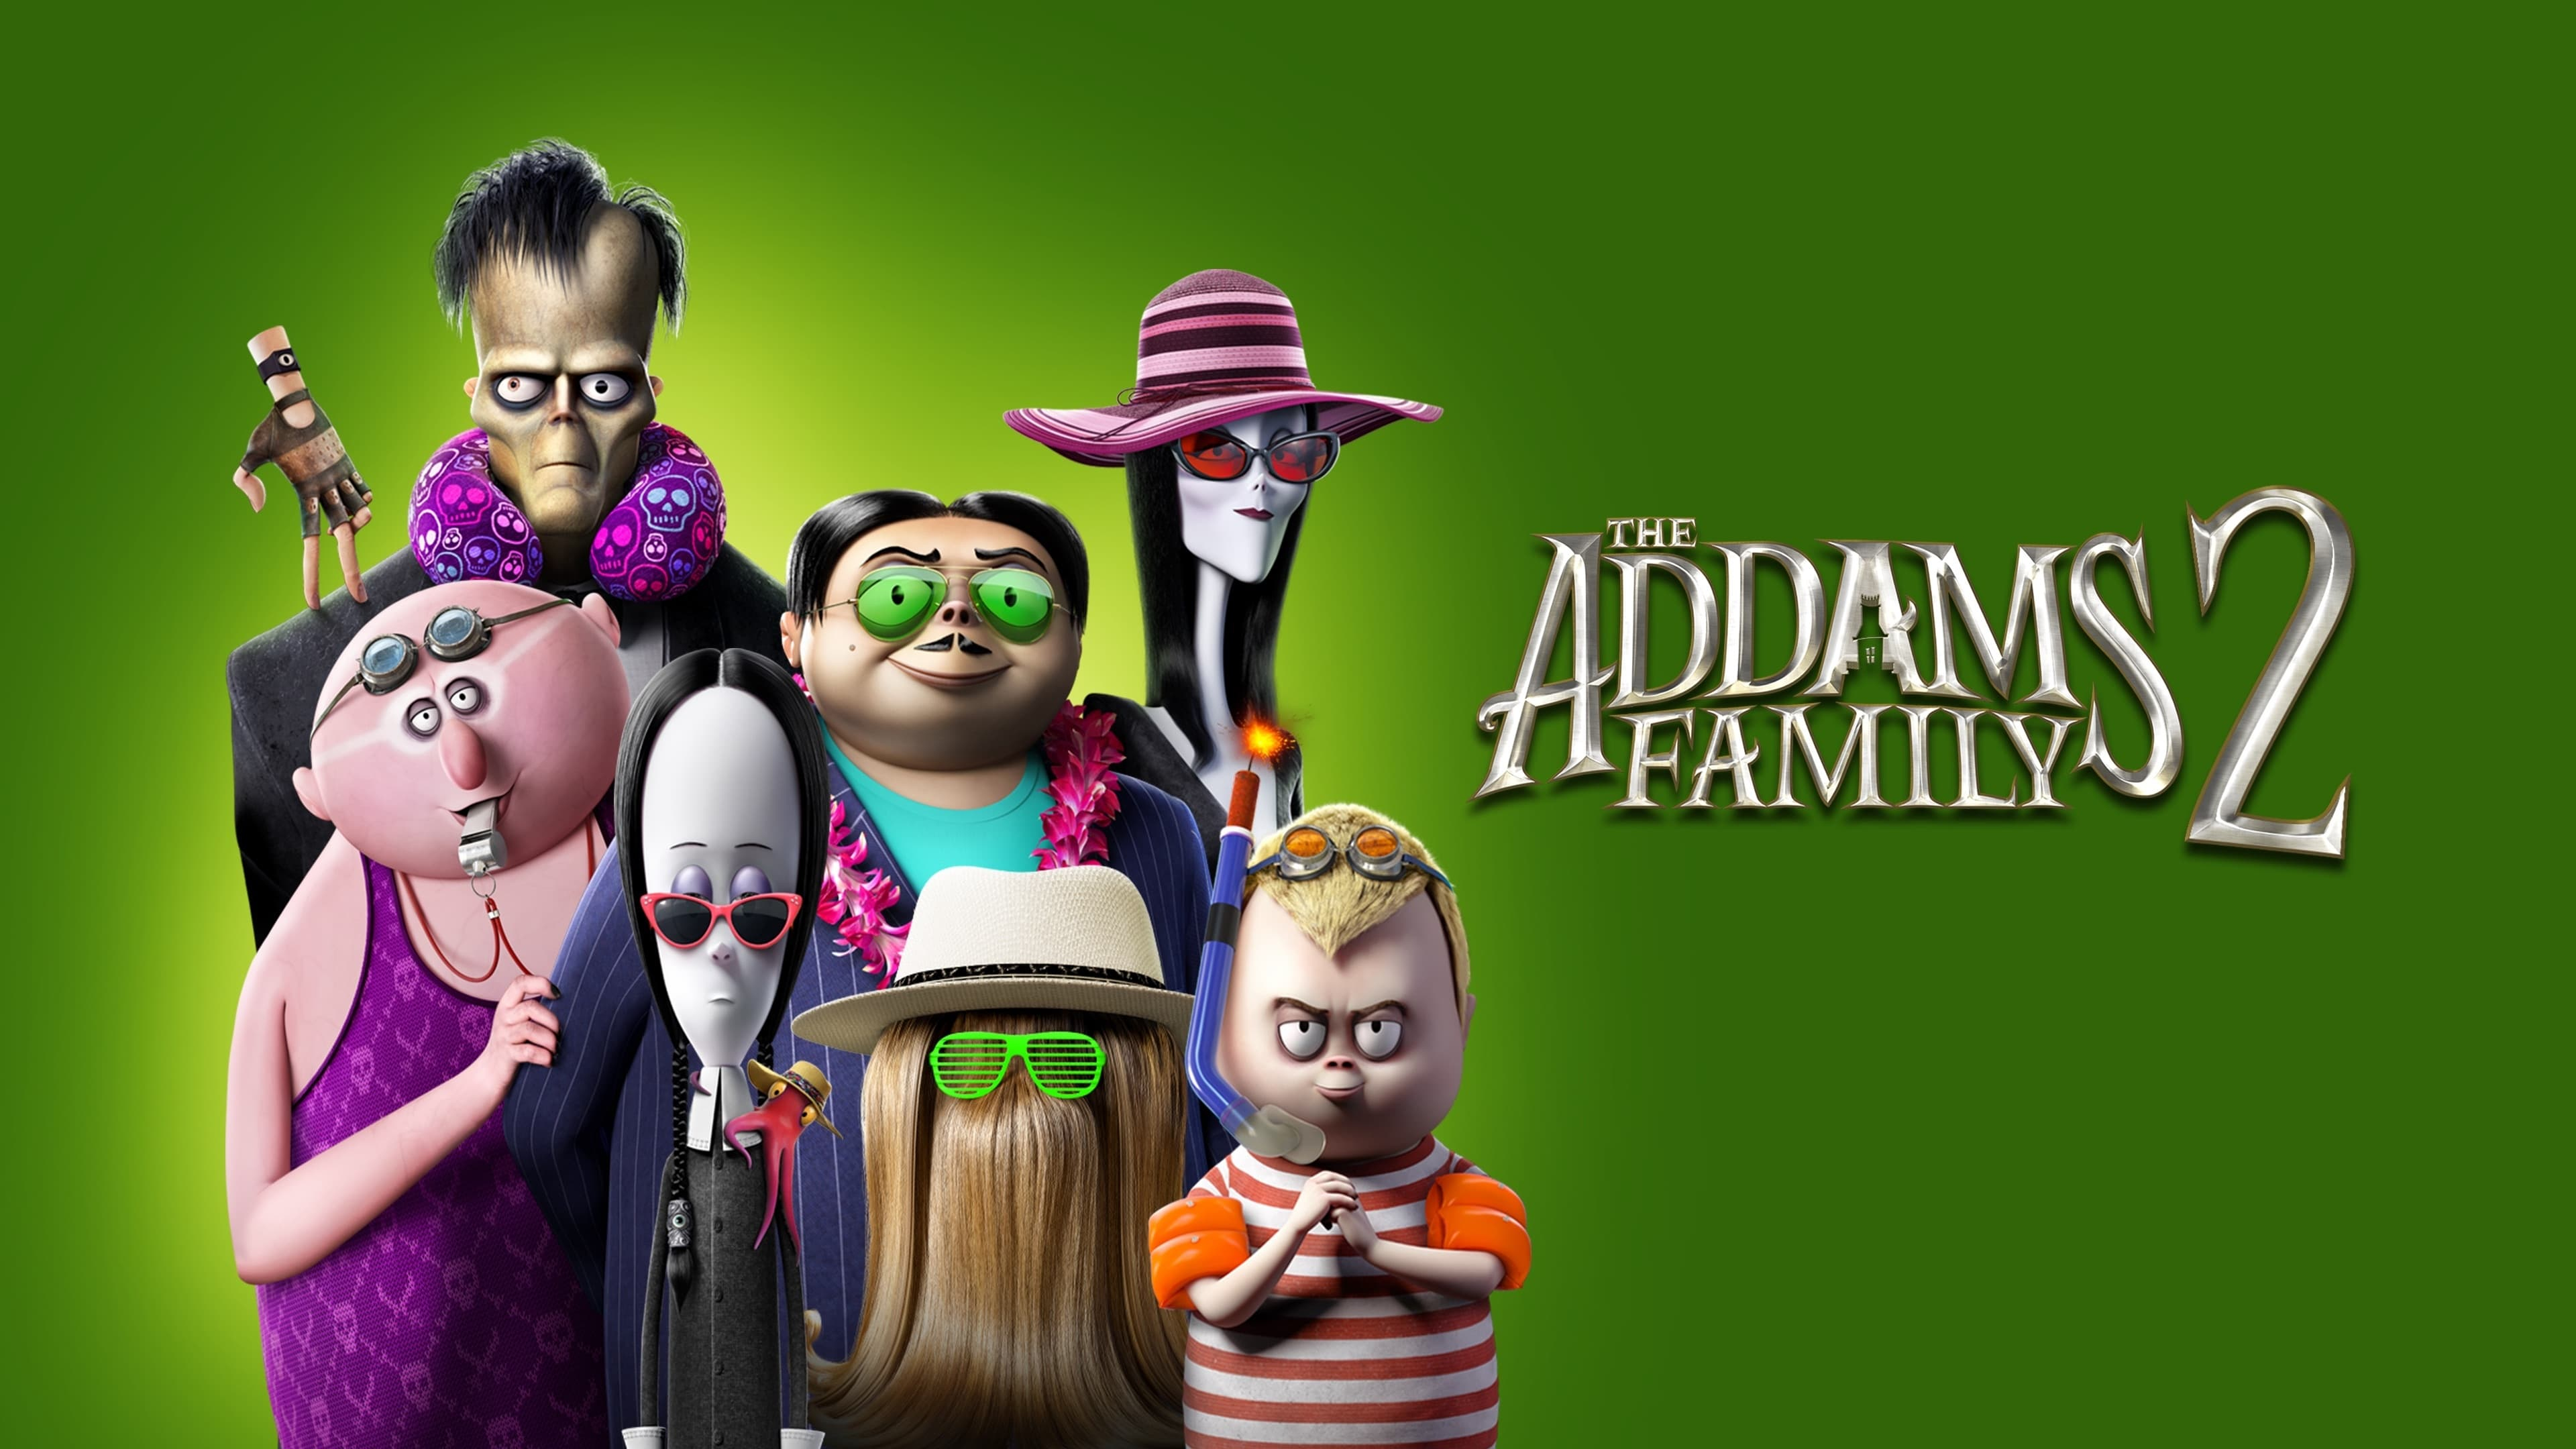 The Addams Family 2 / The Addams Family 2 (2021)